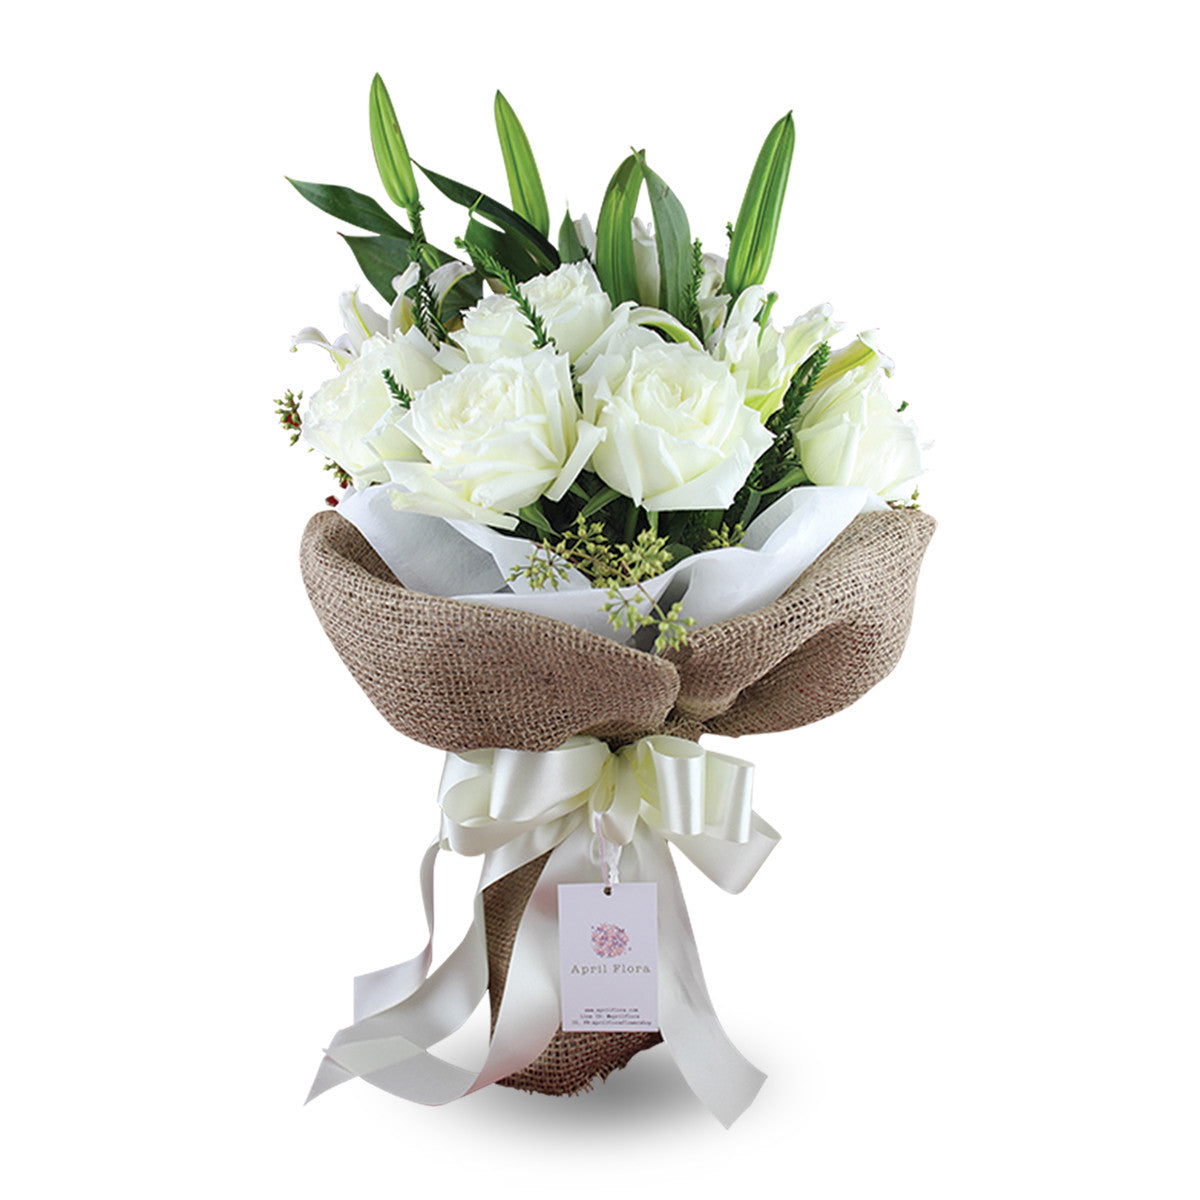 Cute Bouquet Of White Roses And Lilies - April Flora